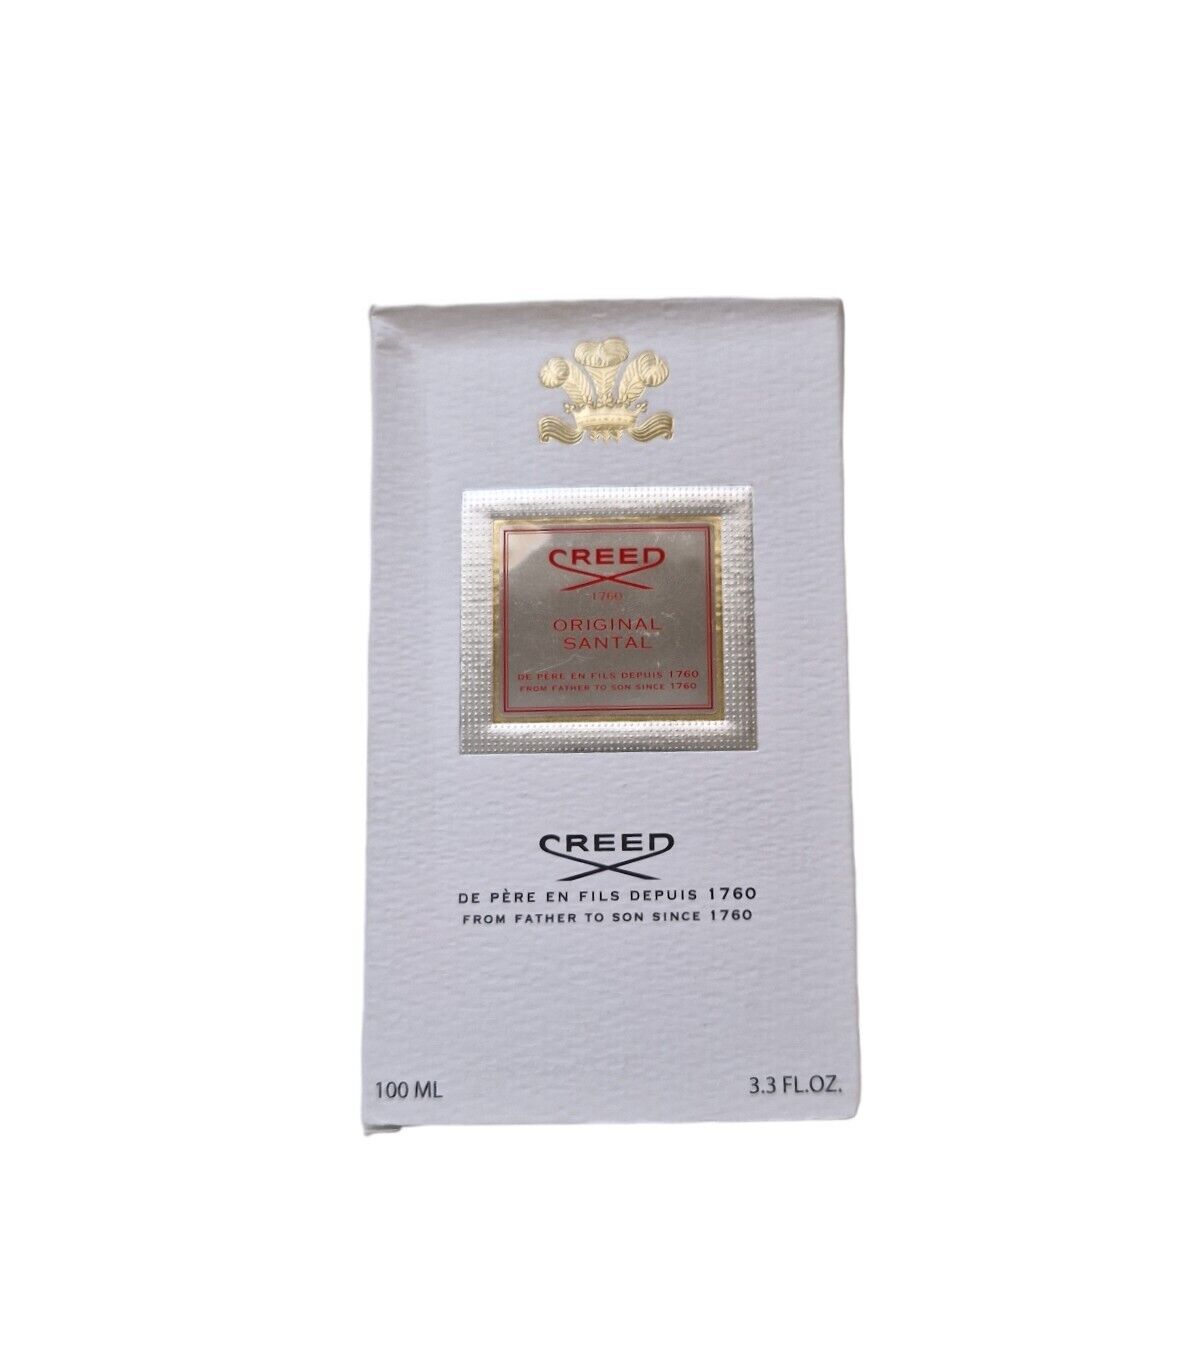 Creed Original Santal 100ml EMPTY Box & Papers Collectable